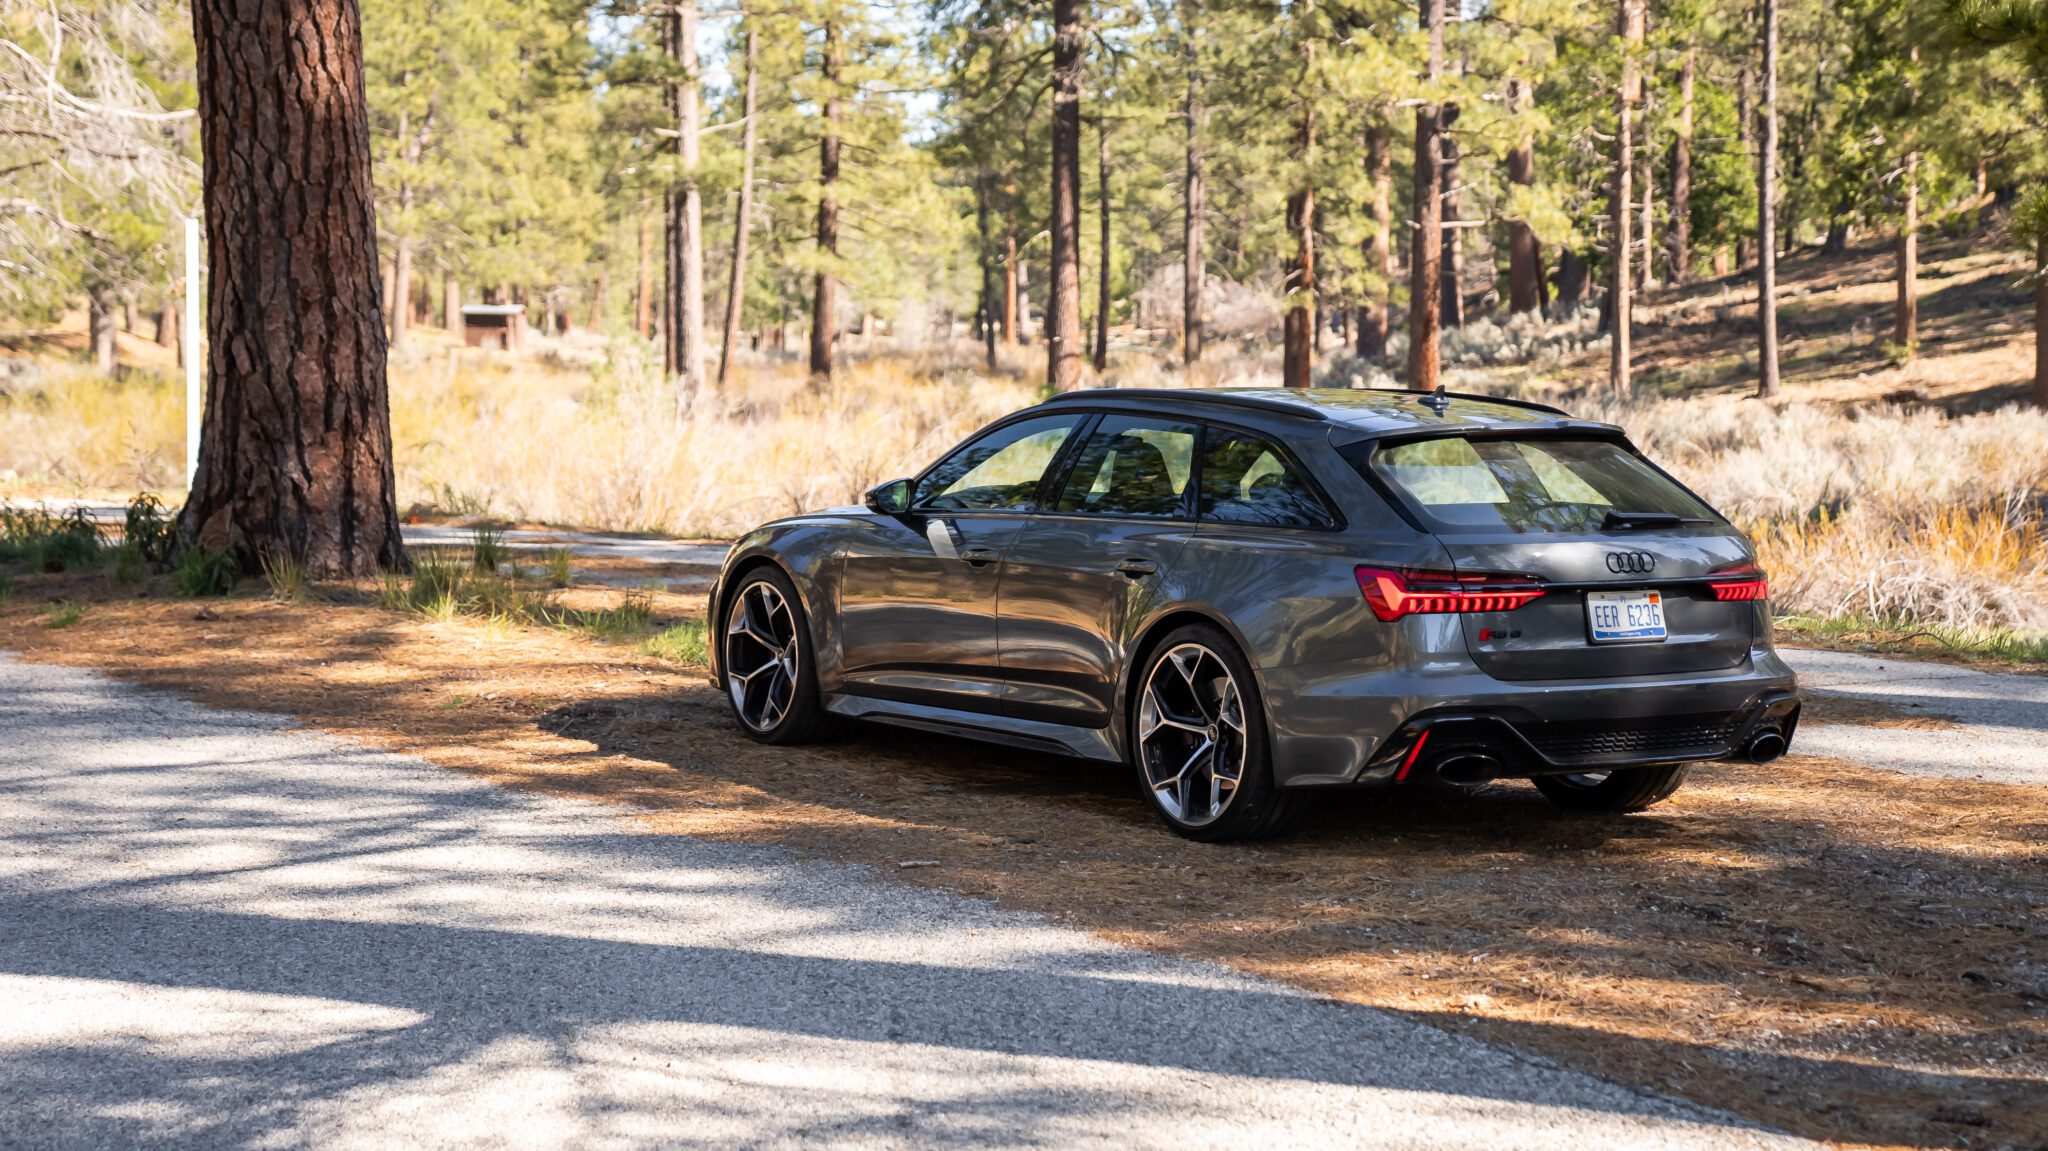 An image of an Audi RS6 Avant Performance parked outdoors.